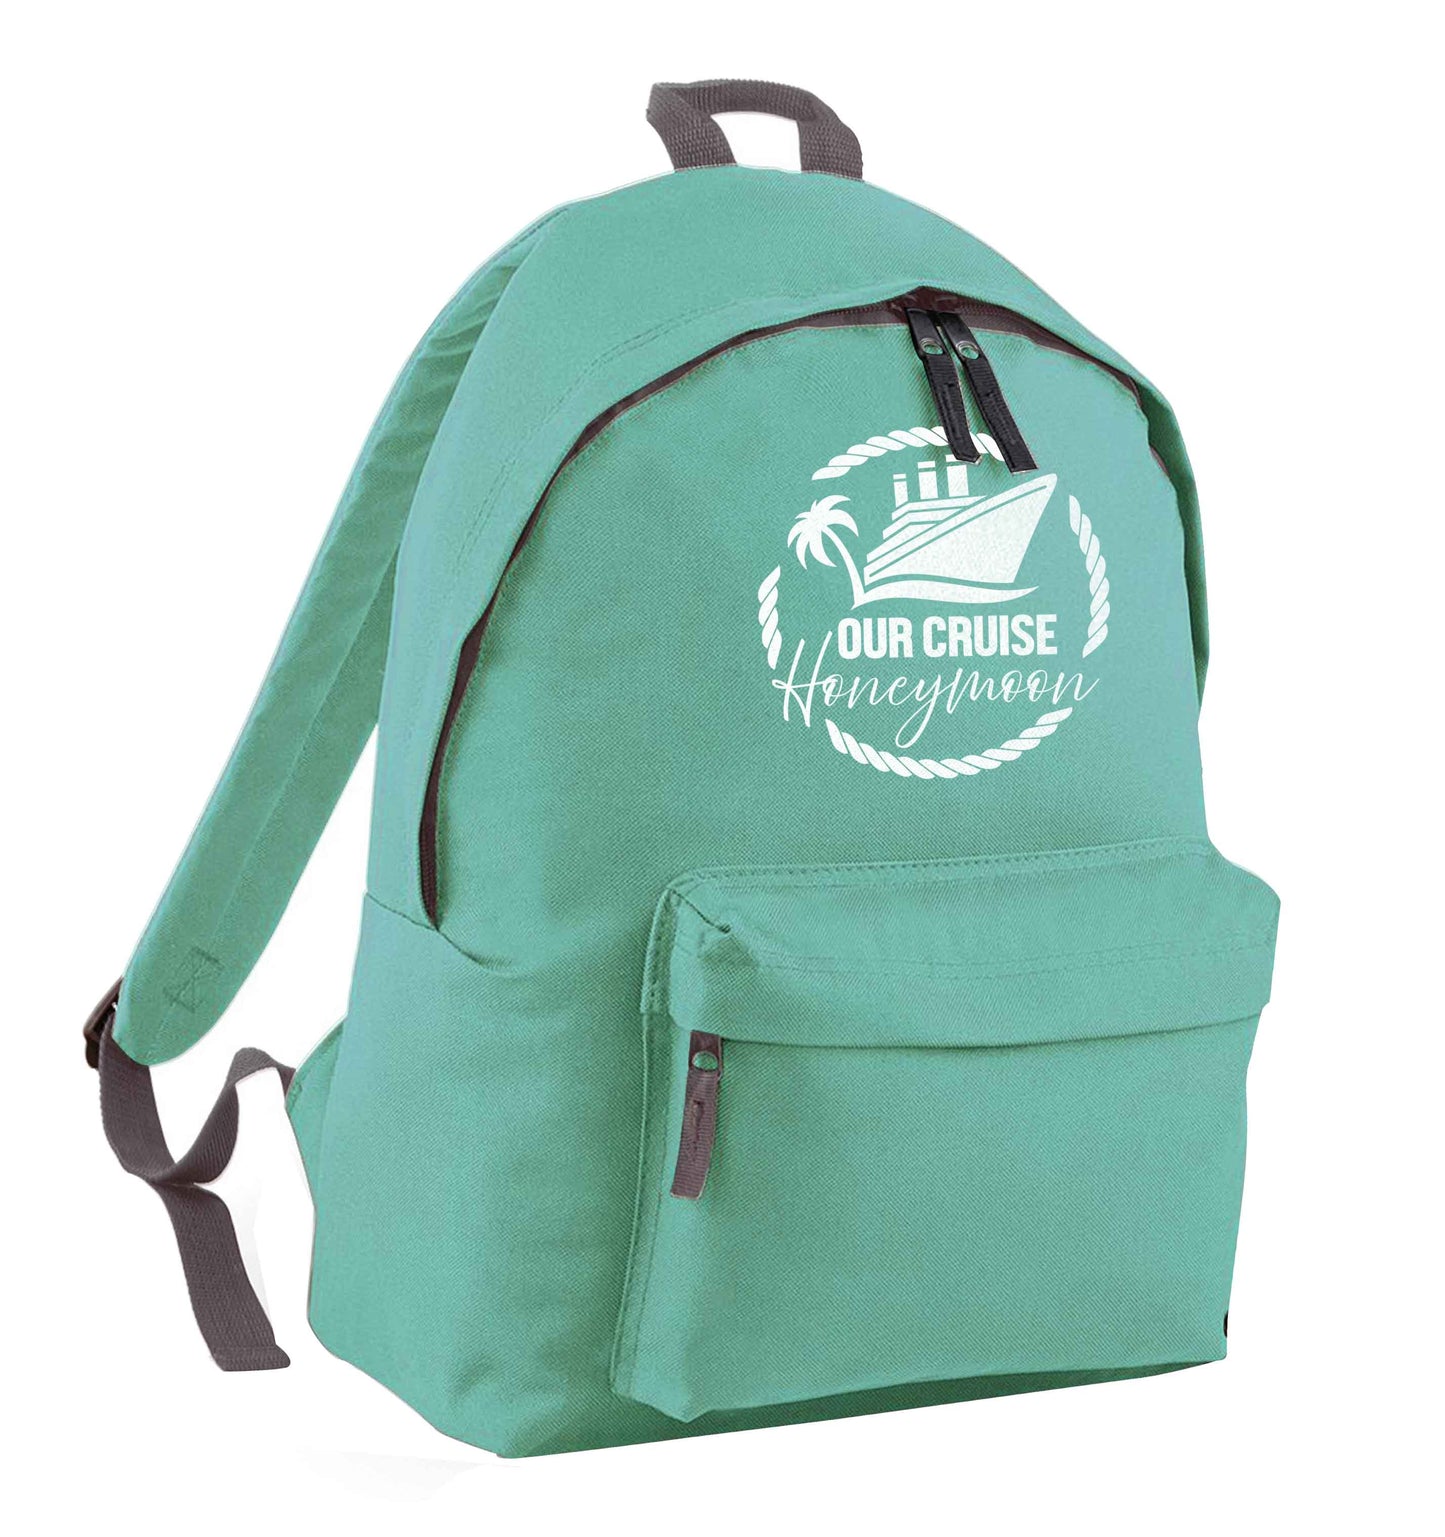 Our cruise honeymoon mint adults backpack